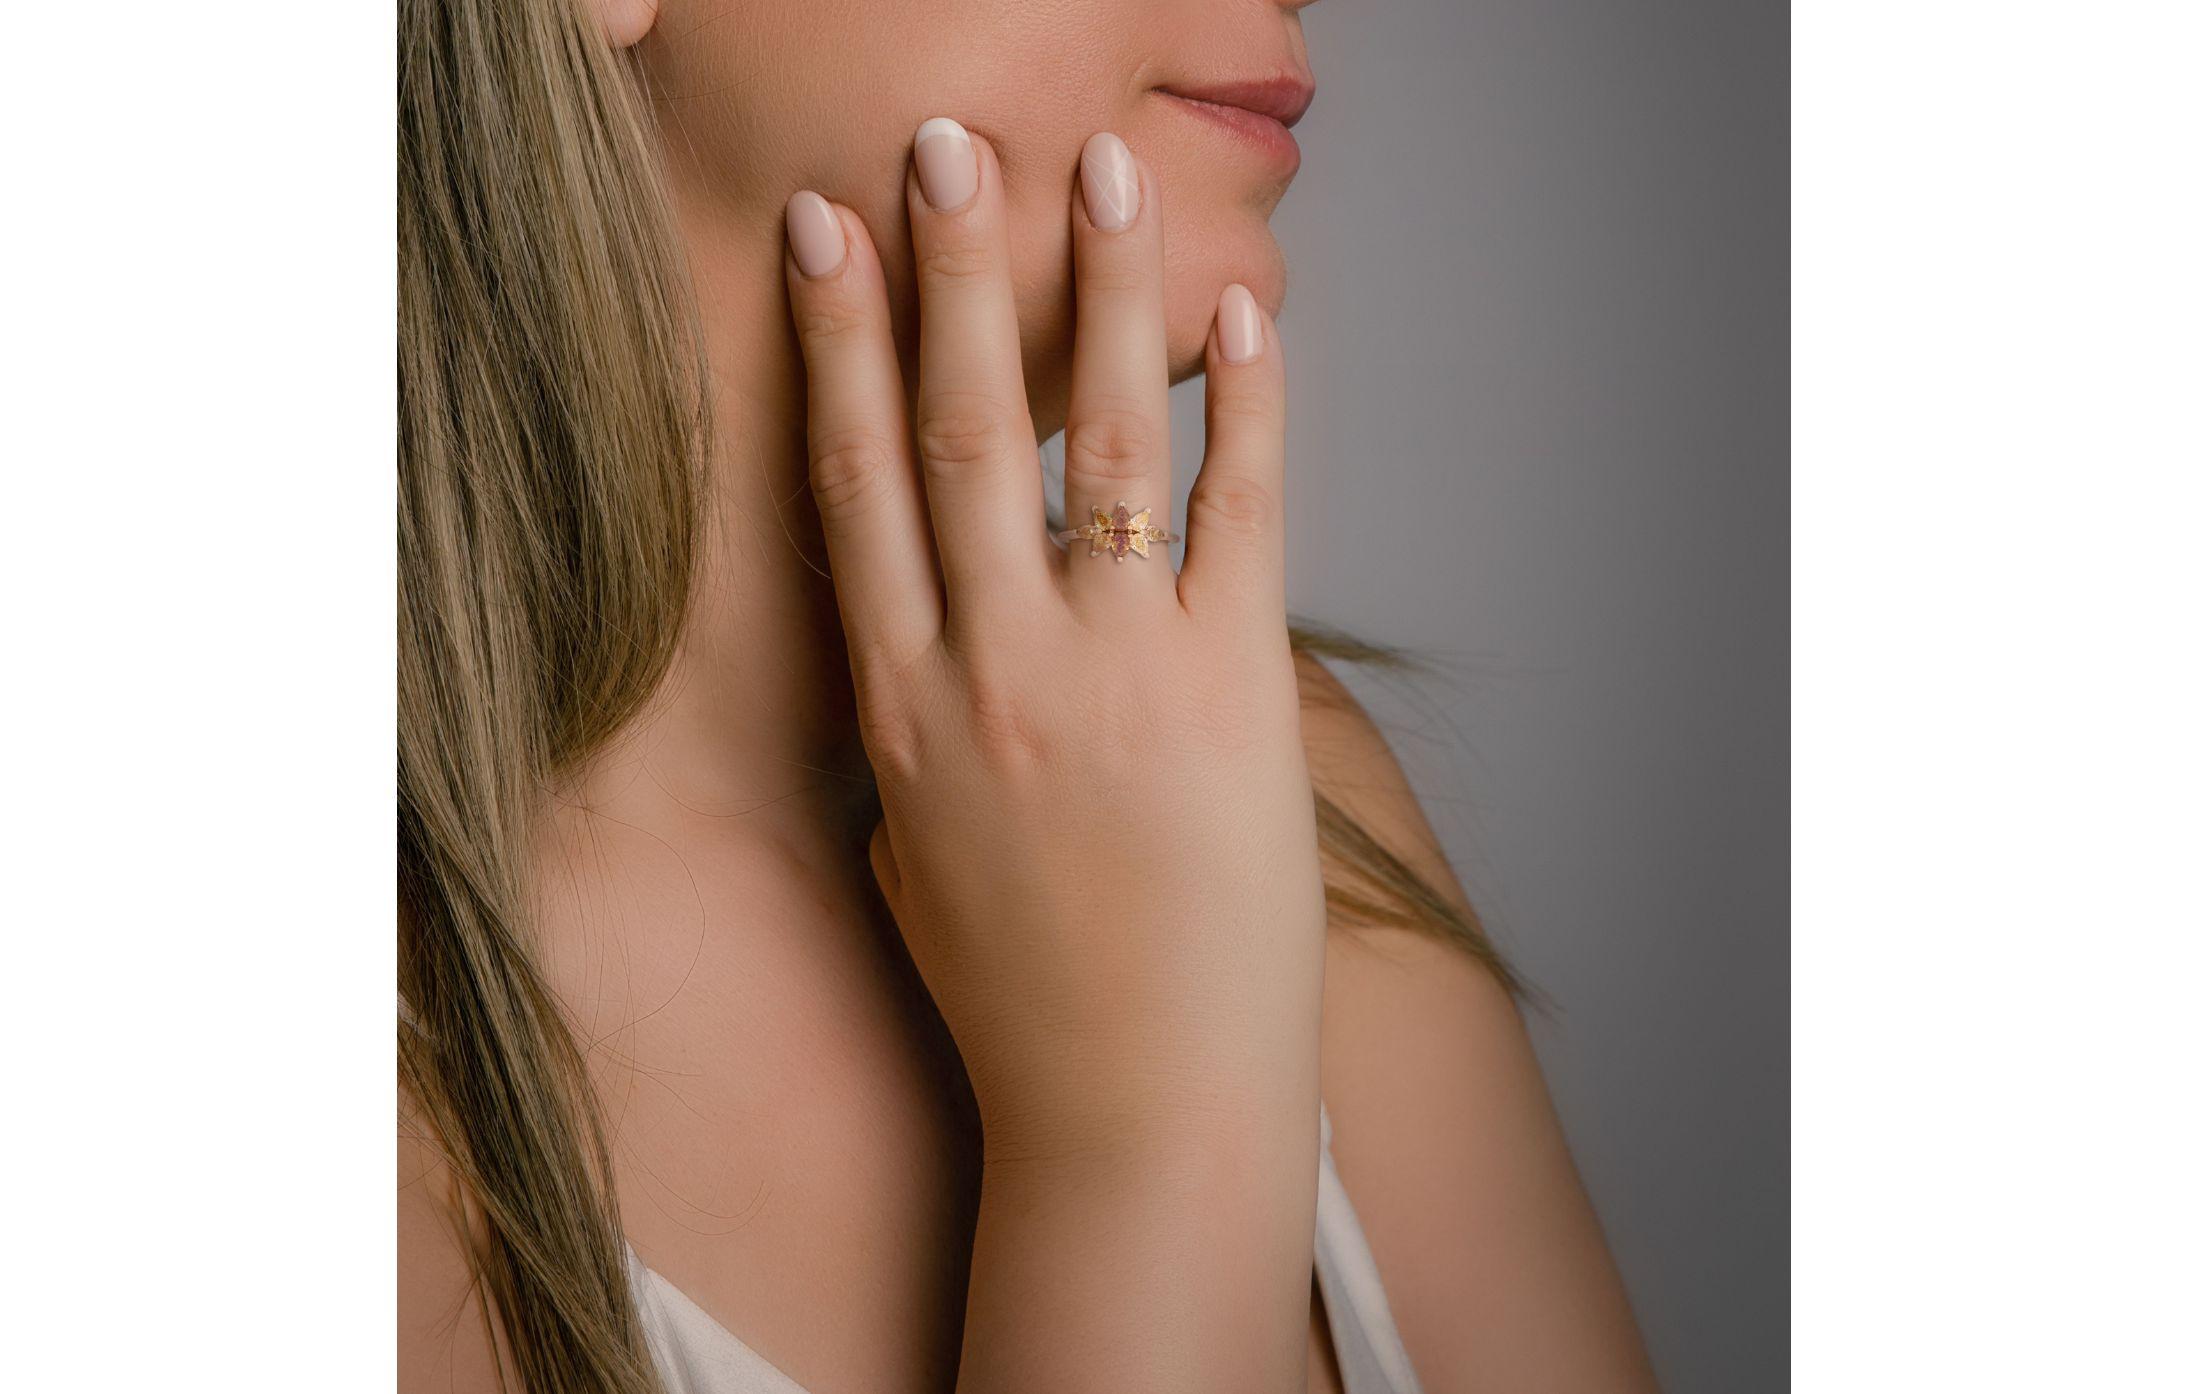 Crafted in lustrous 14K rose gold, the warm and romantic tones of the metal provide the perfect canvas for the floral design. The rose gold complements the diamond beautifully, infusing the ring with a sense of femininity and modern sophistication.